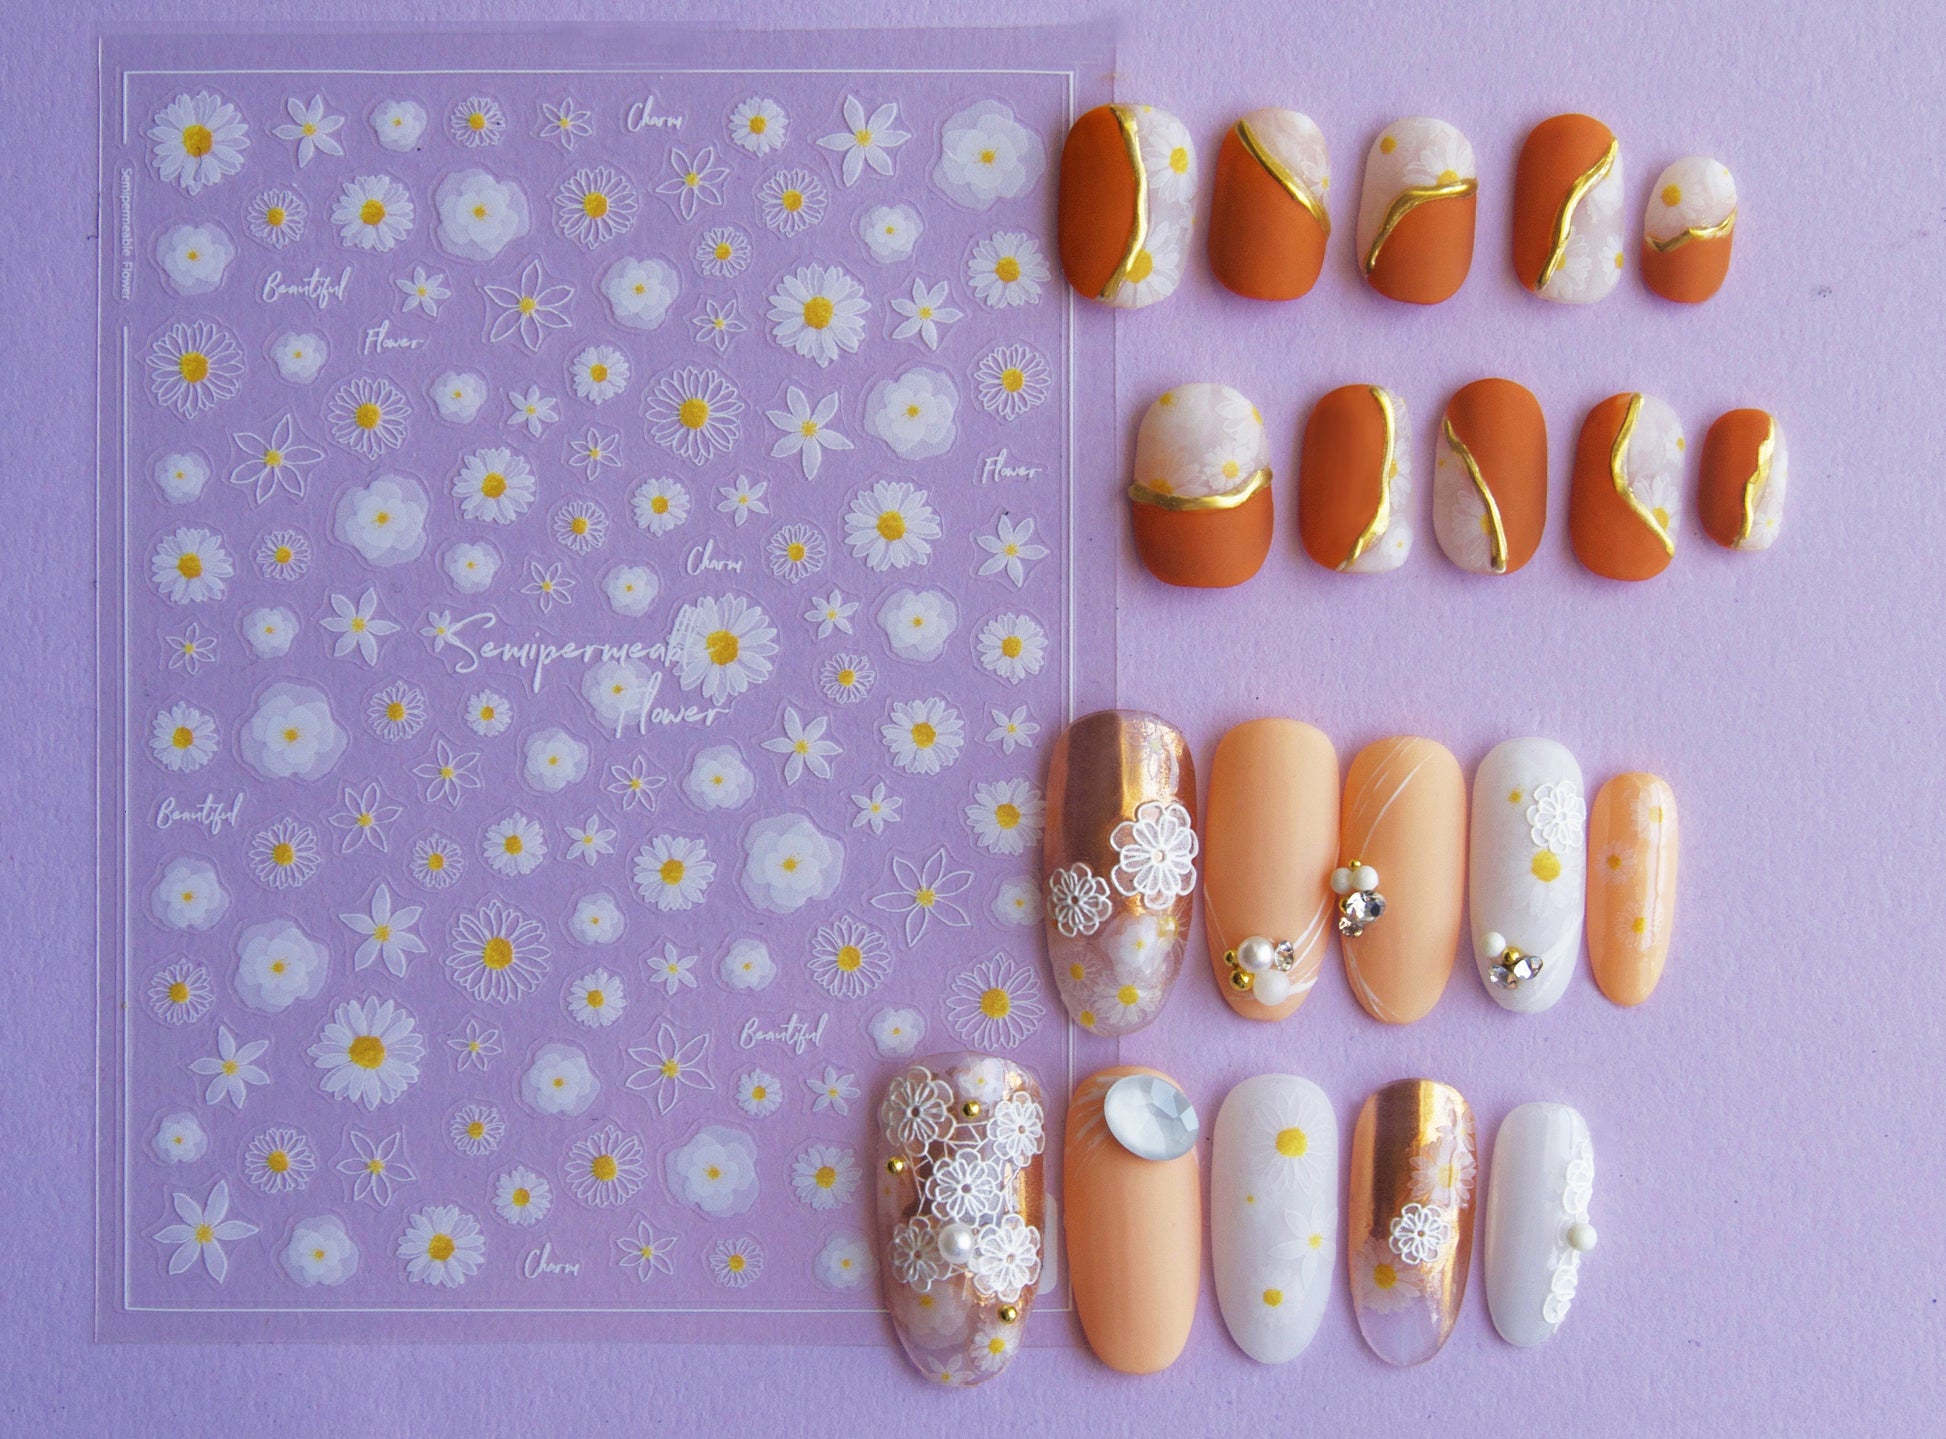 White Daisy flower Nail Art Sticker Peel off daisies Stickers/ Chrysanthemum Oxeye Bouquet flower Manicure Nail Supply Ultra thin decal